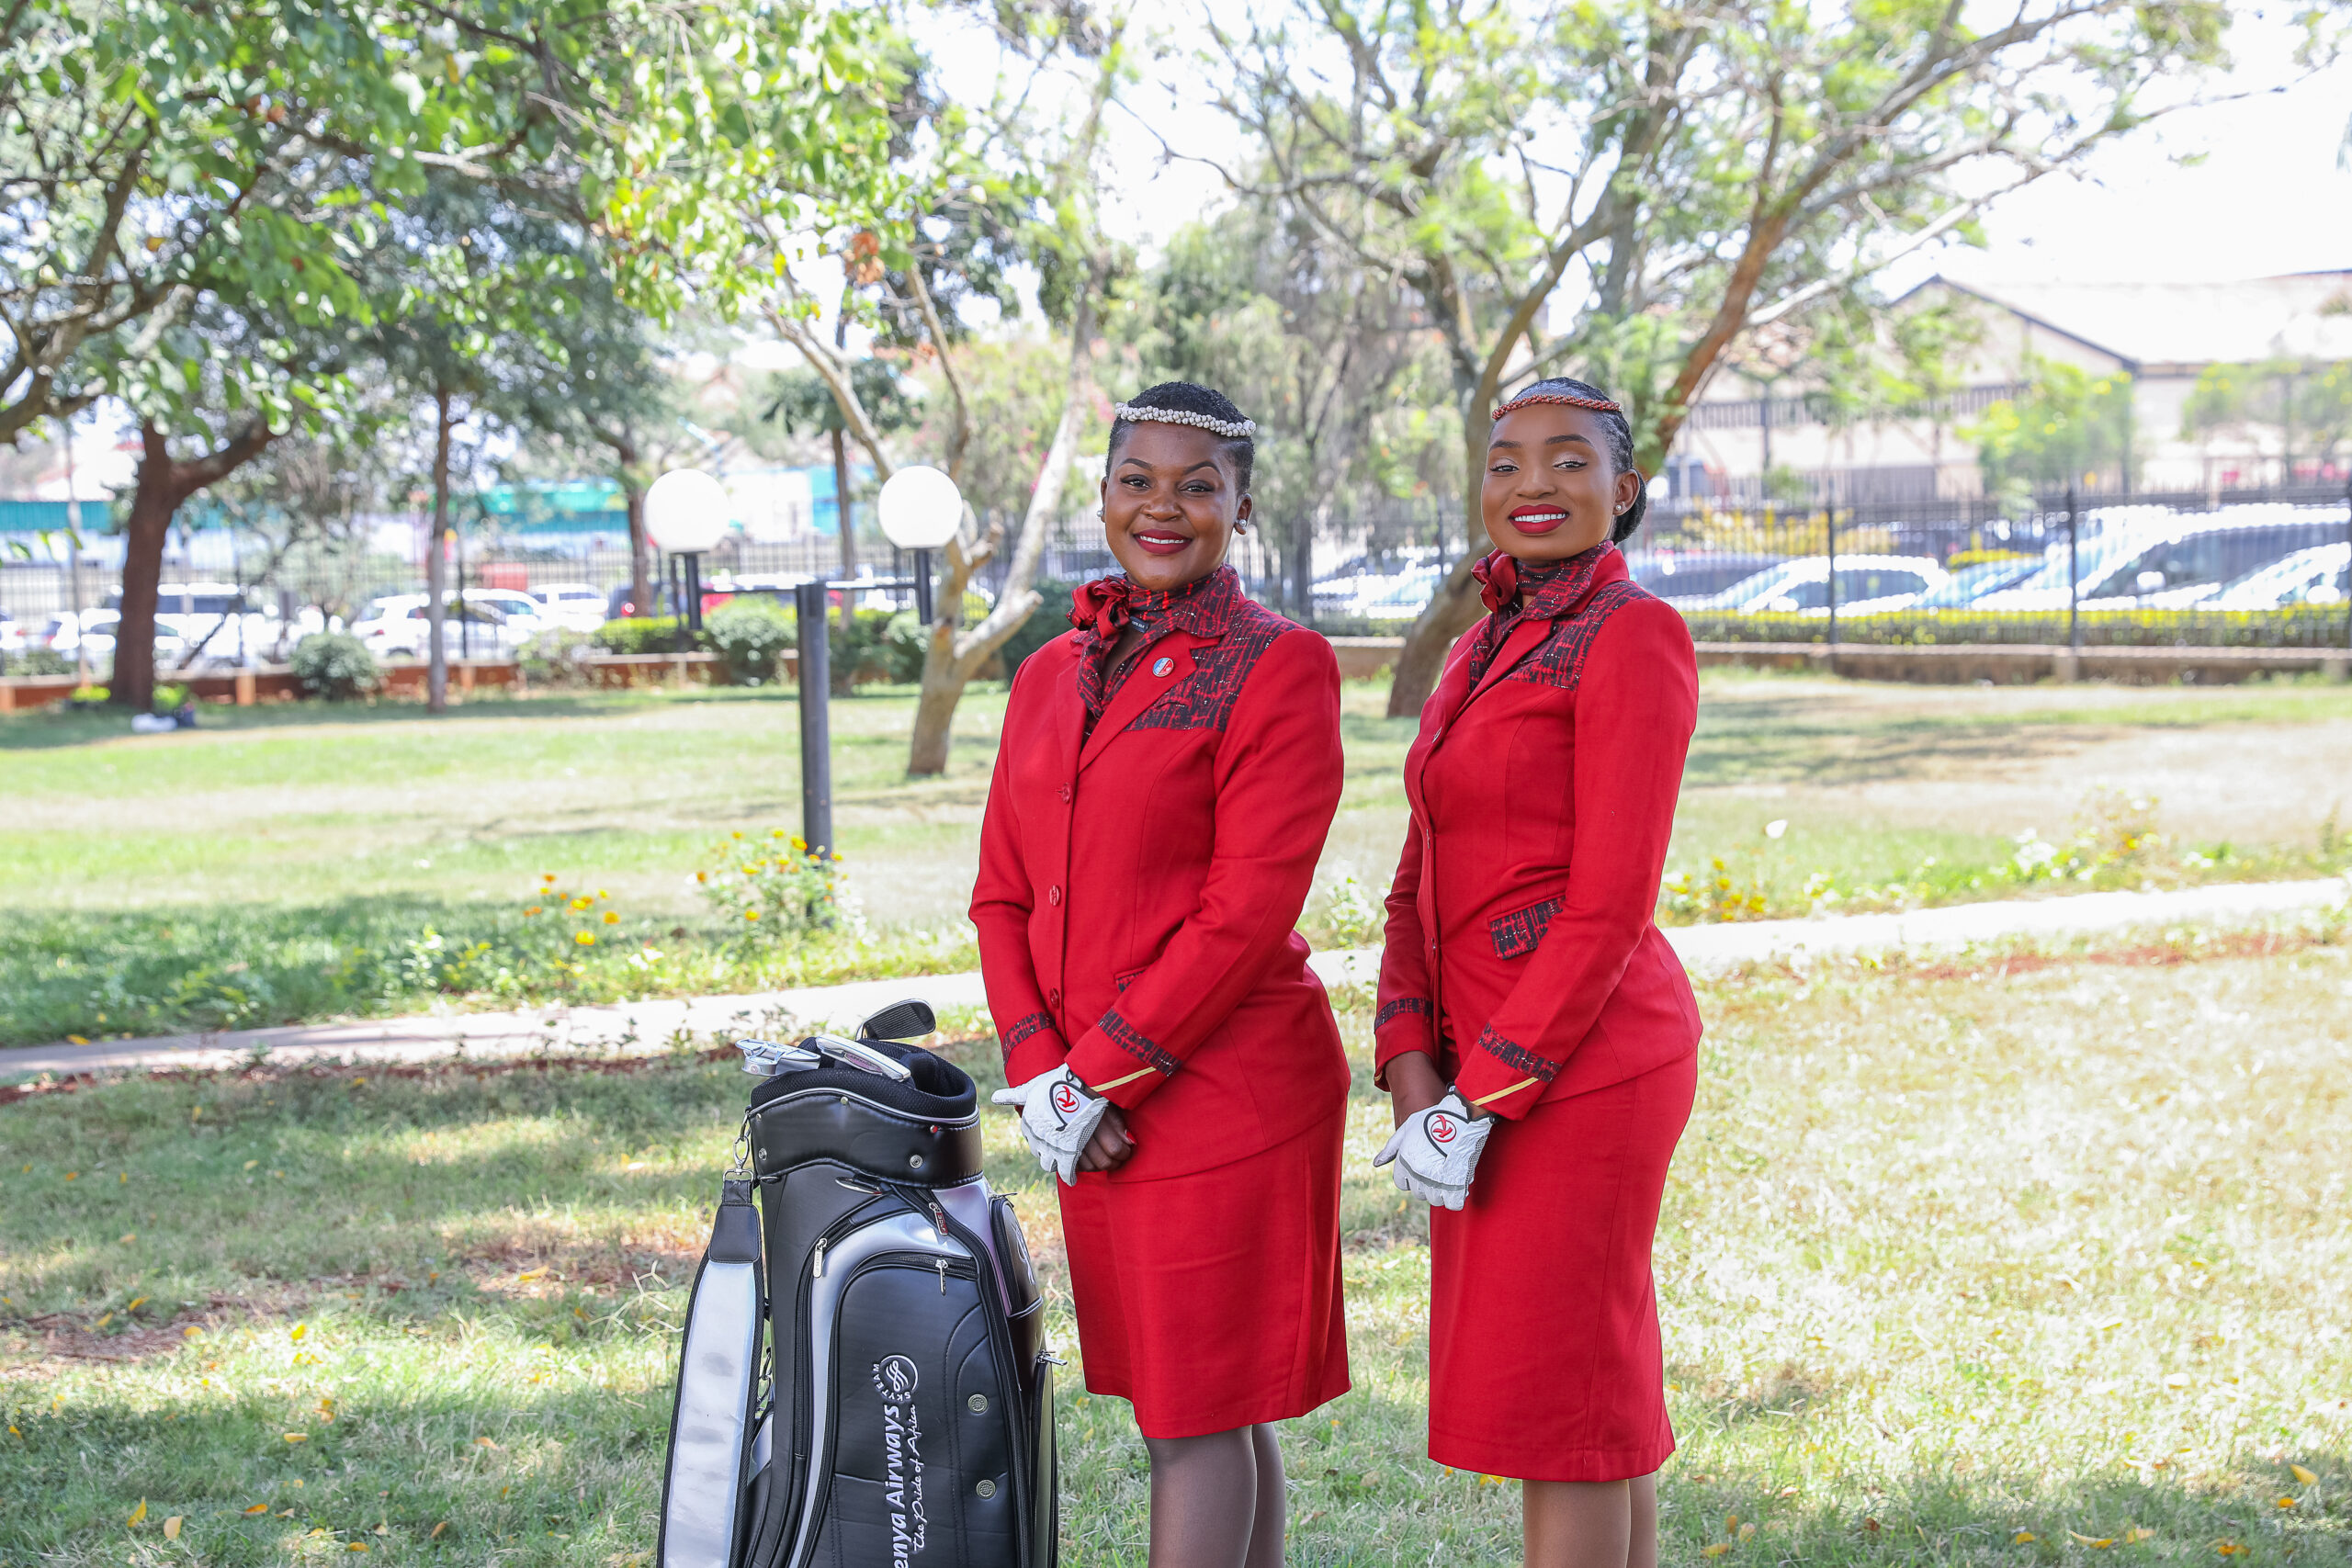 Kenya Airways is the official airline partner for the Magical Kenya